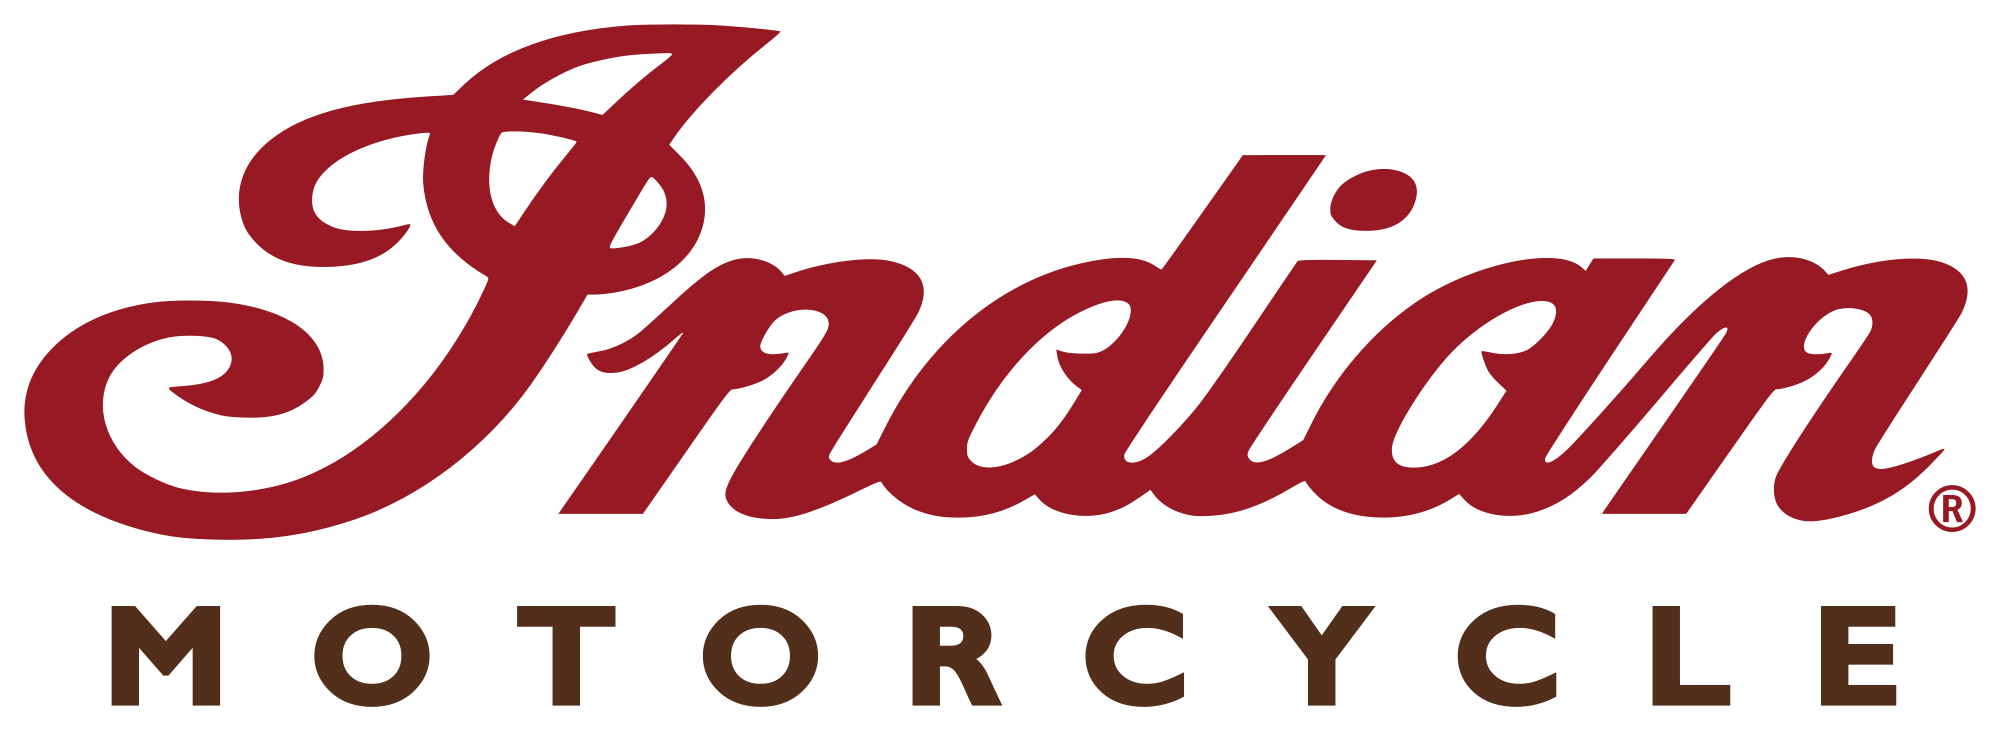 Indian Motorcycle Logo - File:Indian Motorcycle logo.svg - Wikimedia Commons